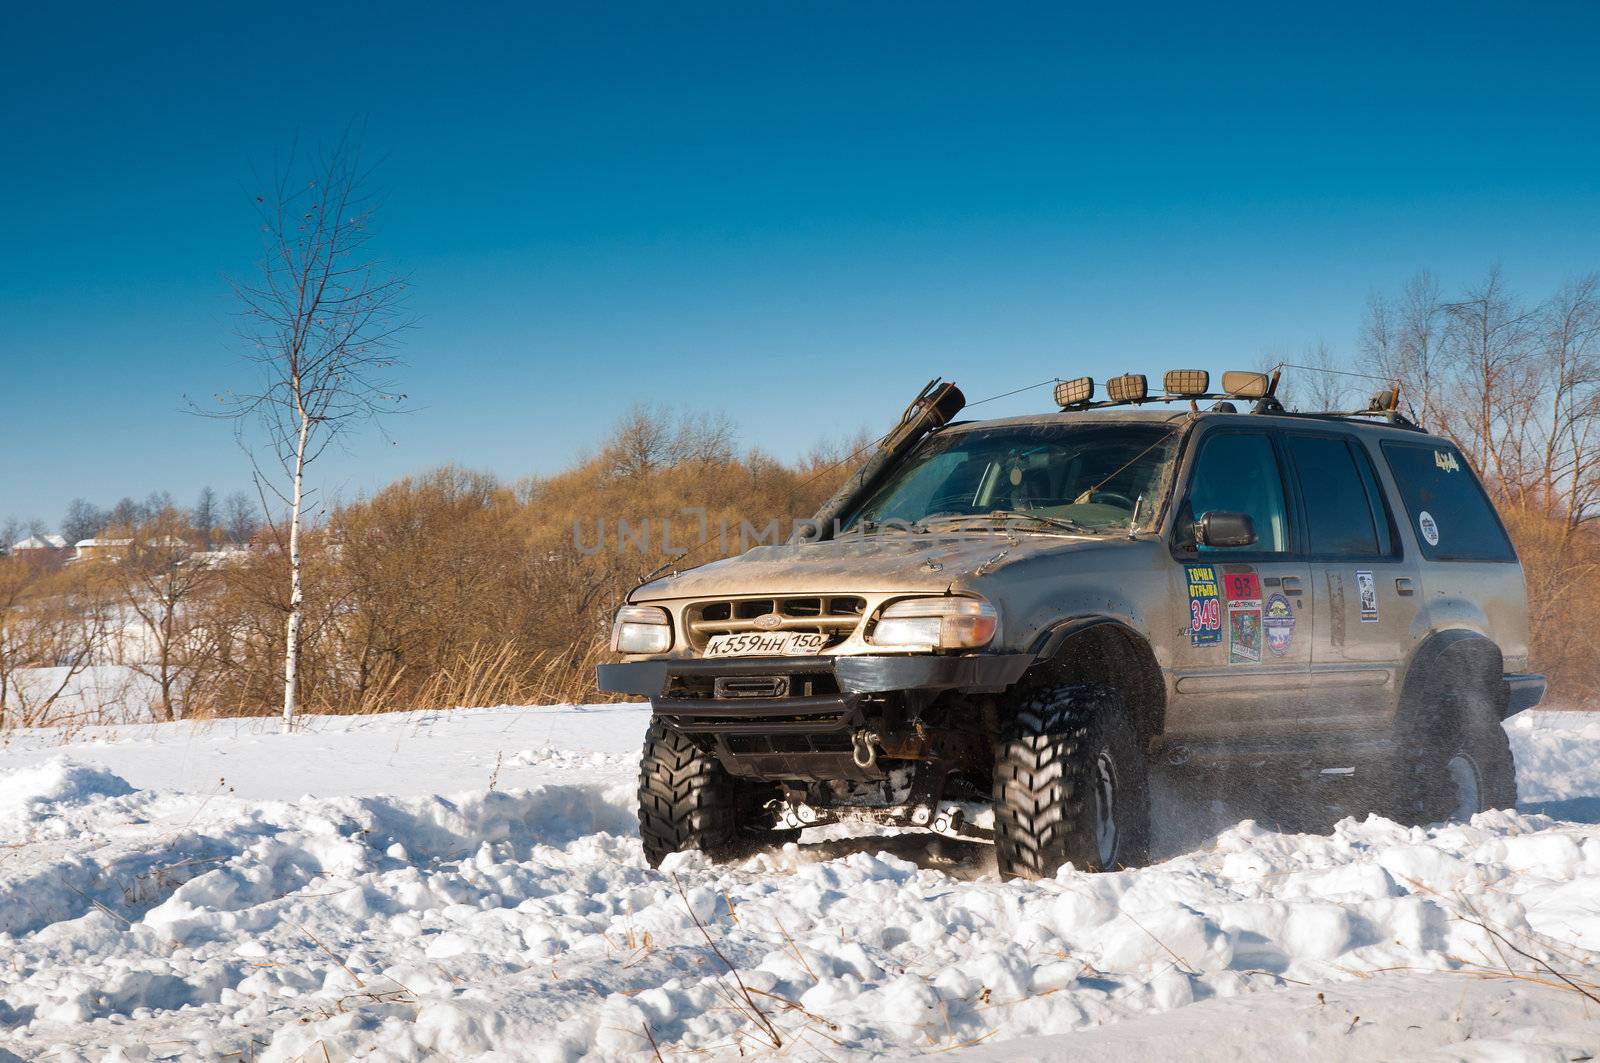 Grey Ford Explorer suv
Car on background the Russian winter.
February 19, 2011. Mattrazz Trophy # 18